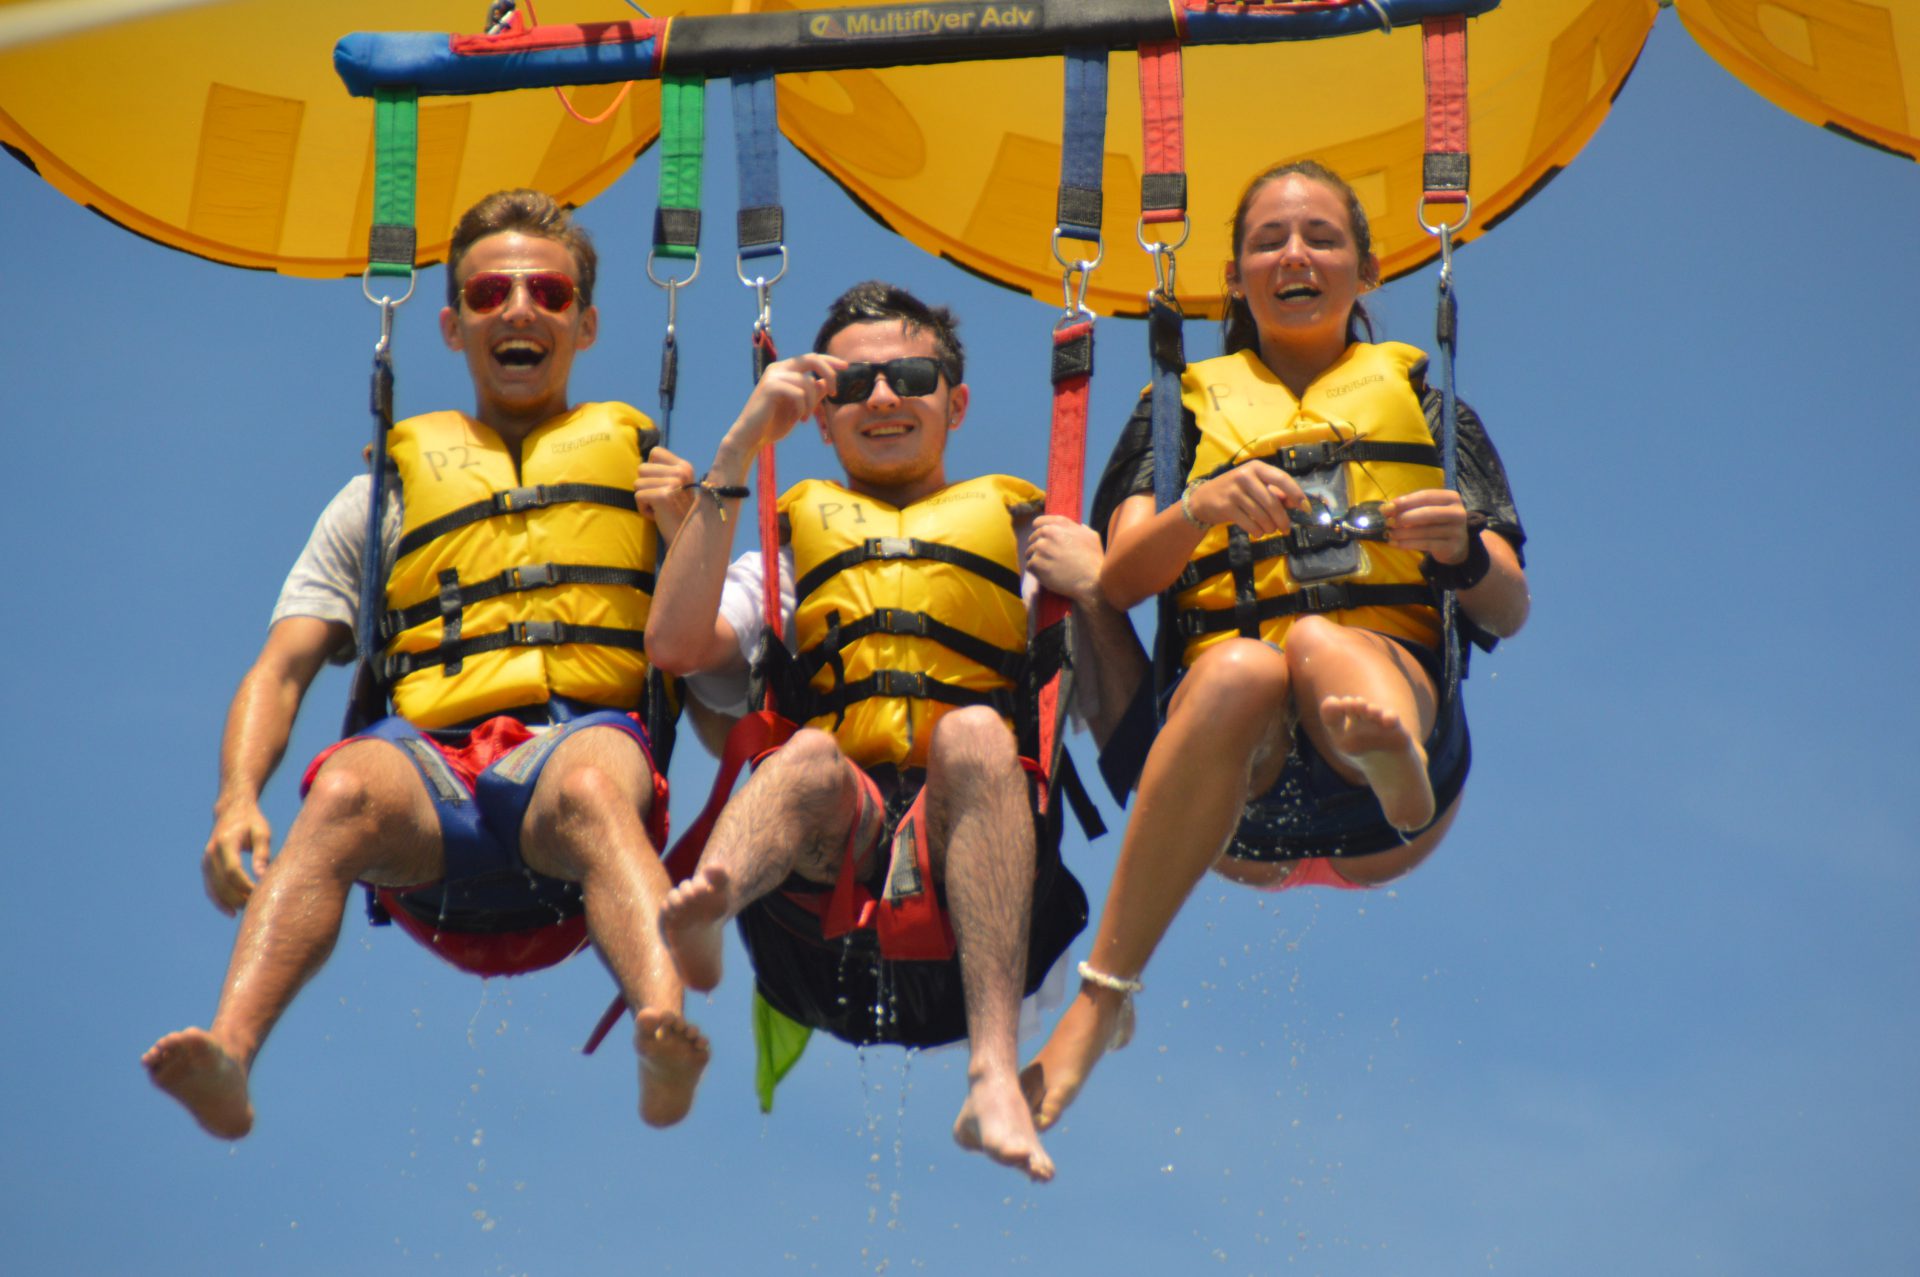 Family smiling during Parasail Ride in Miami